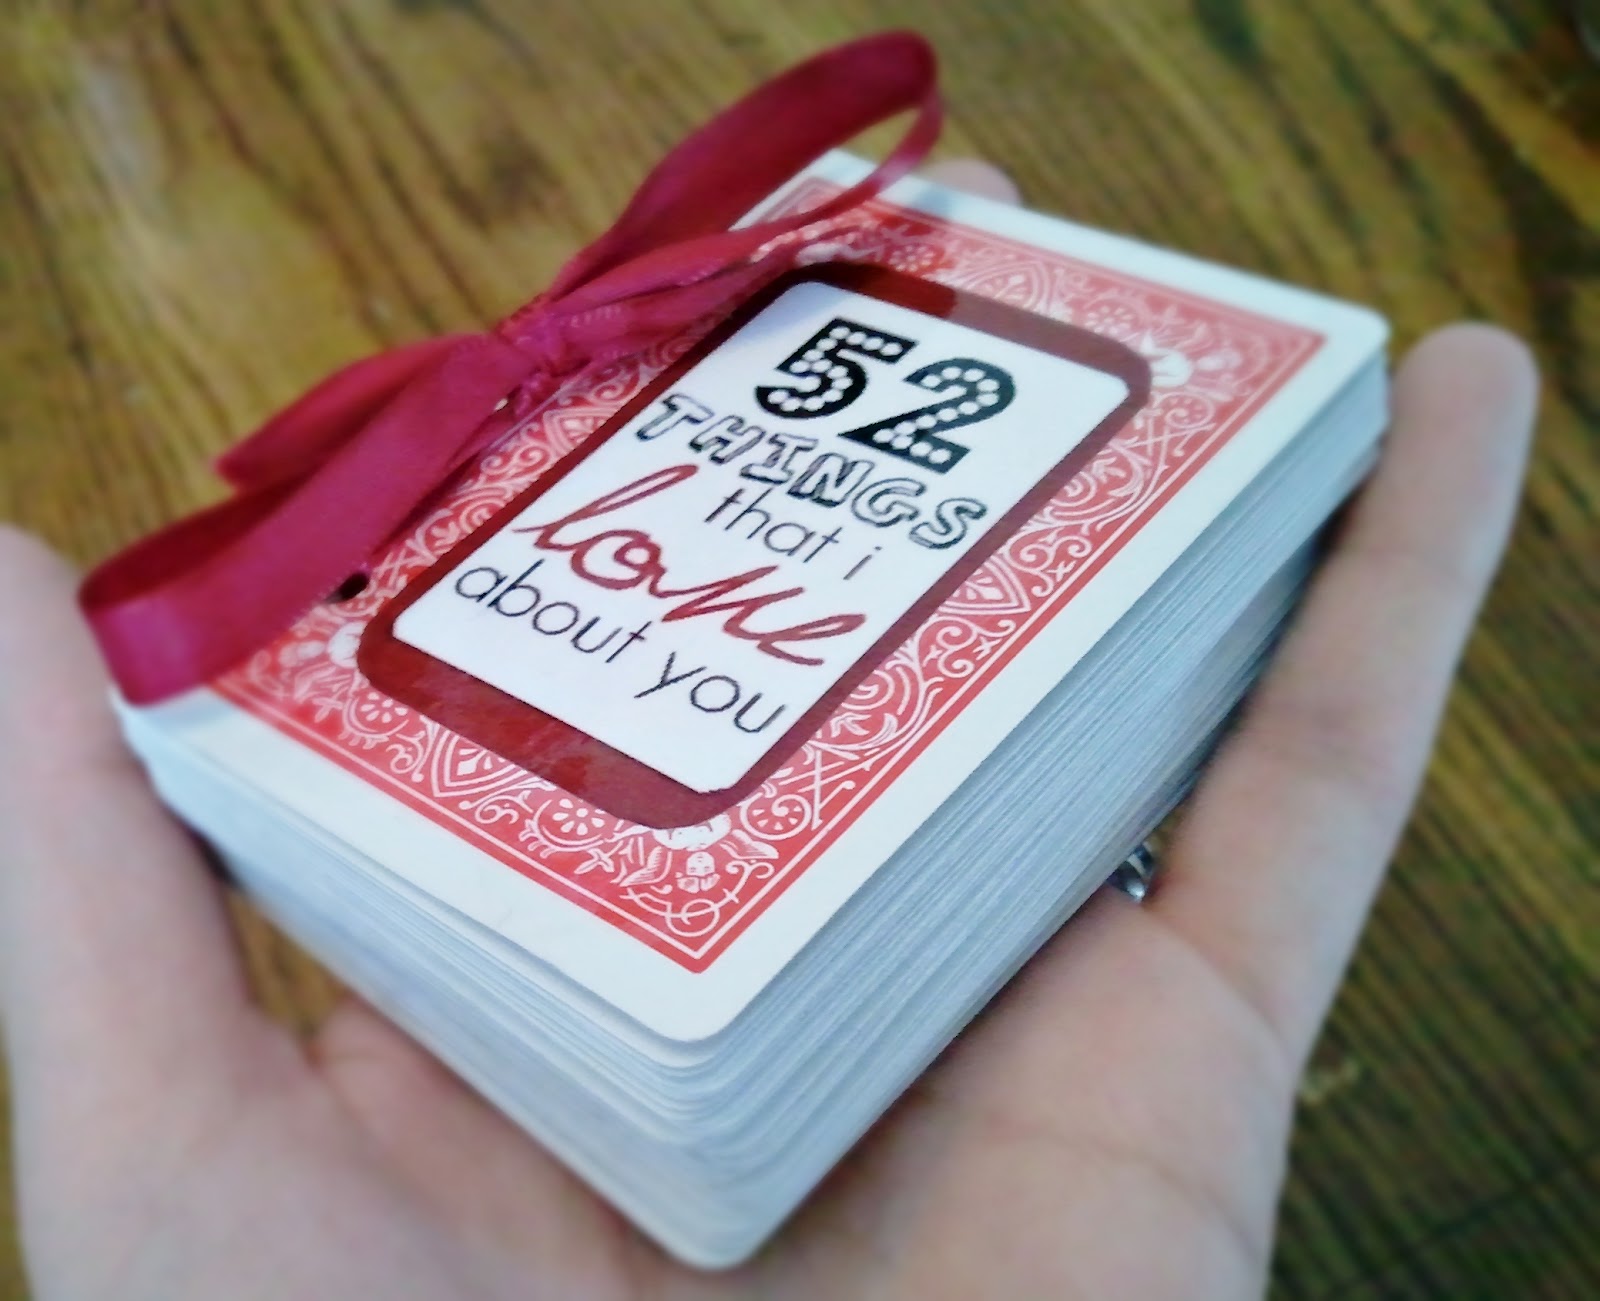 On A Cold Day: 23 Things I Love About You Regarding 52 Things I Love About You Cards Template